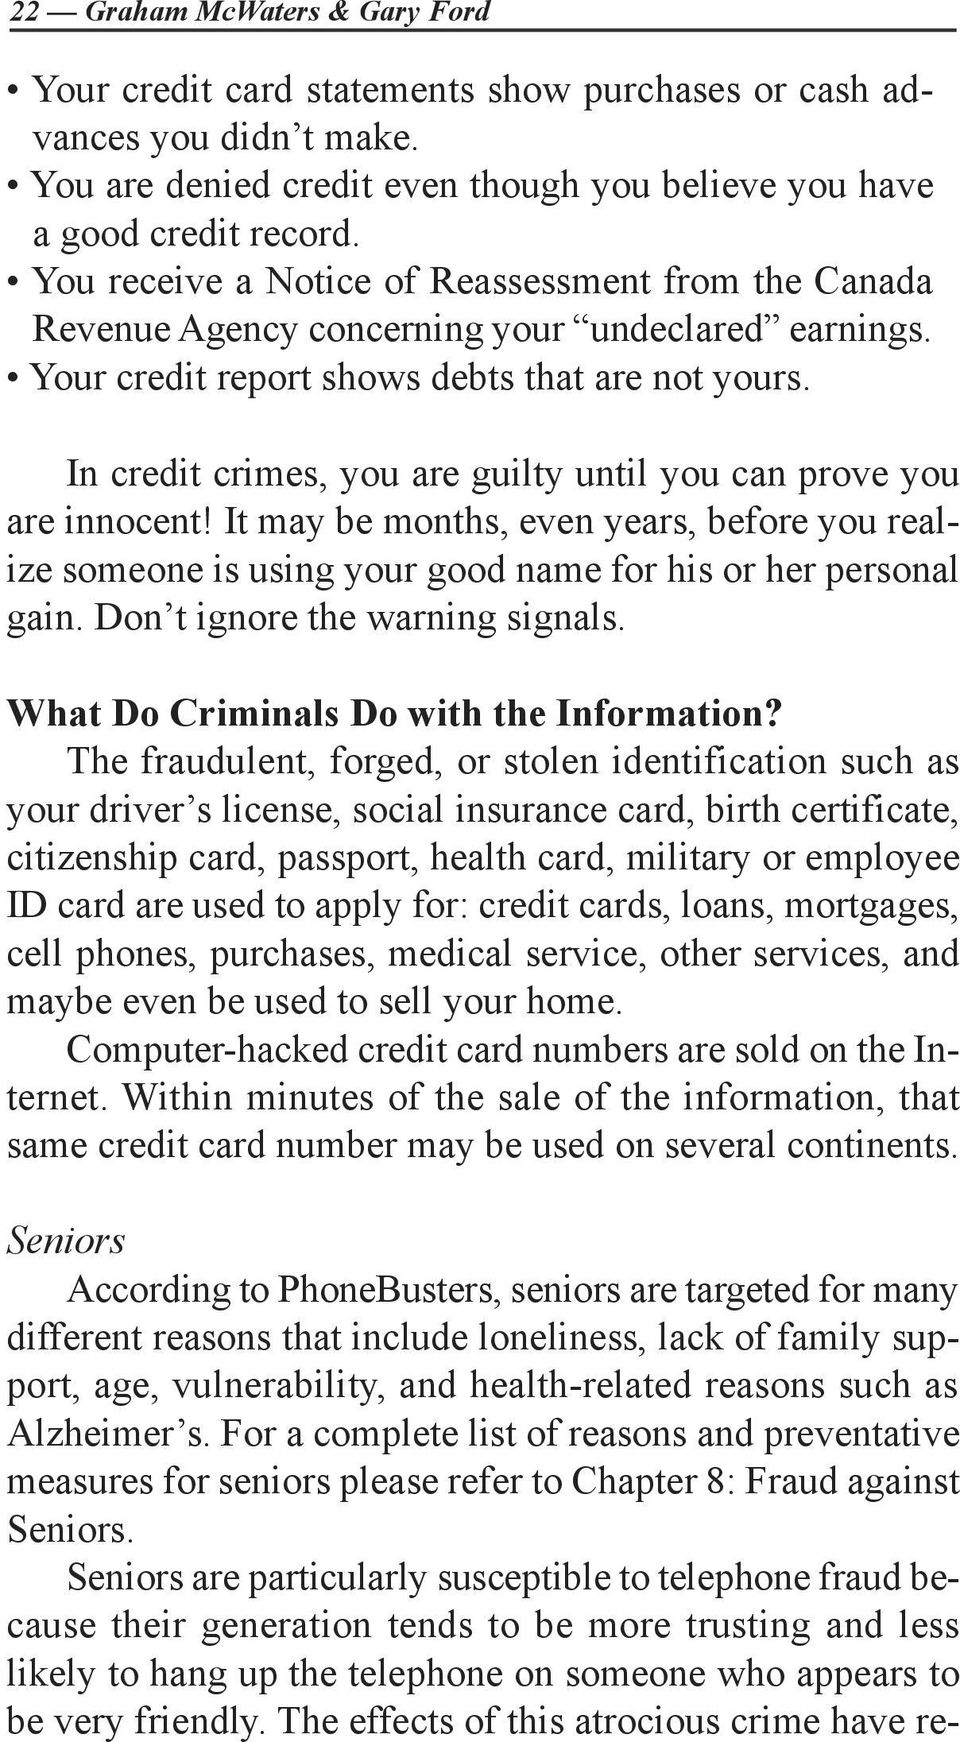 In credit crimes, you are guilty until you can prove you are innocent! It may be months, even years, before you realize someone is using your good name for his or her personal gain.